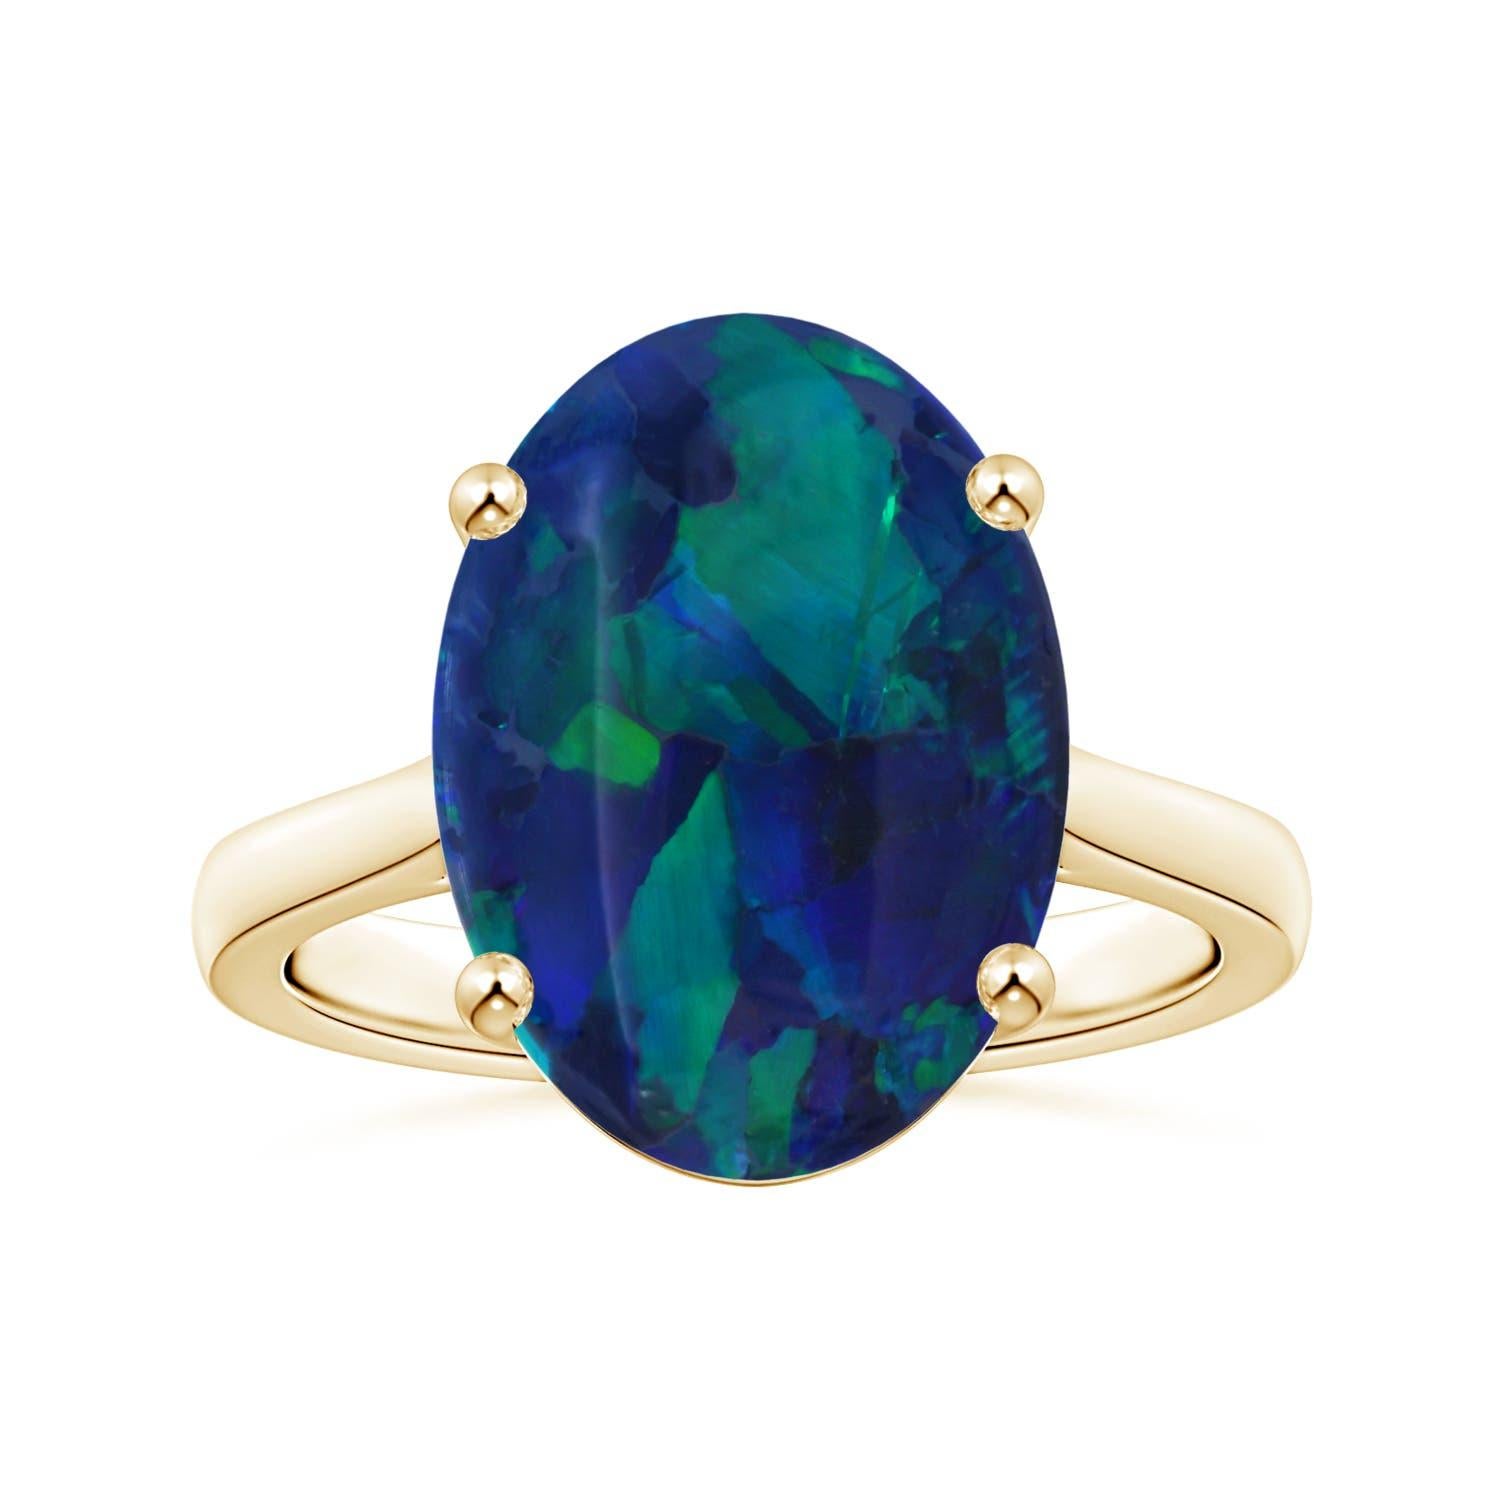 For Sale:  ANGARA GIA Certified Black 6.58ct Opal Ring in 14K Yellow Gold